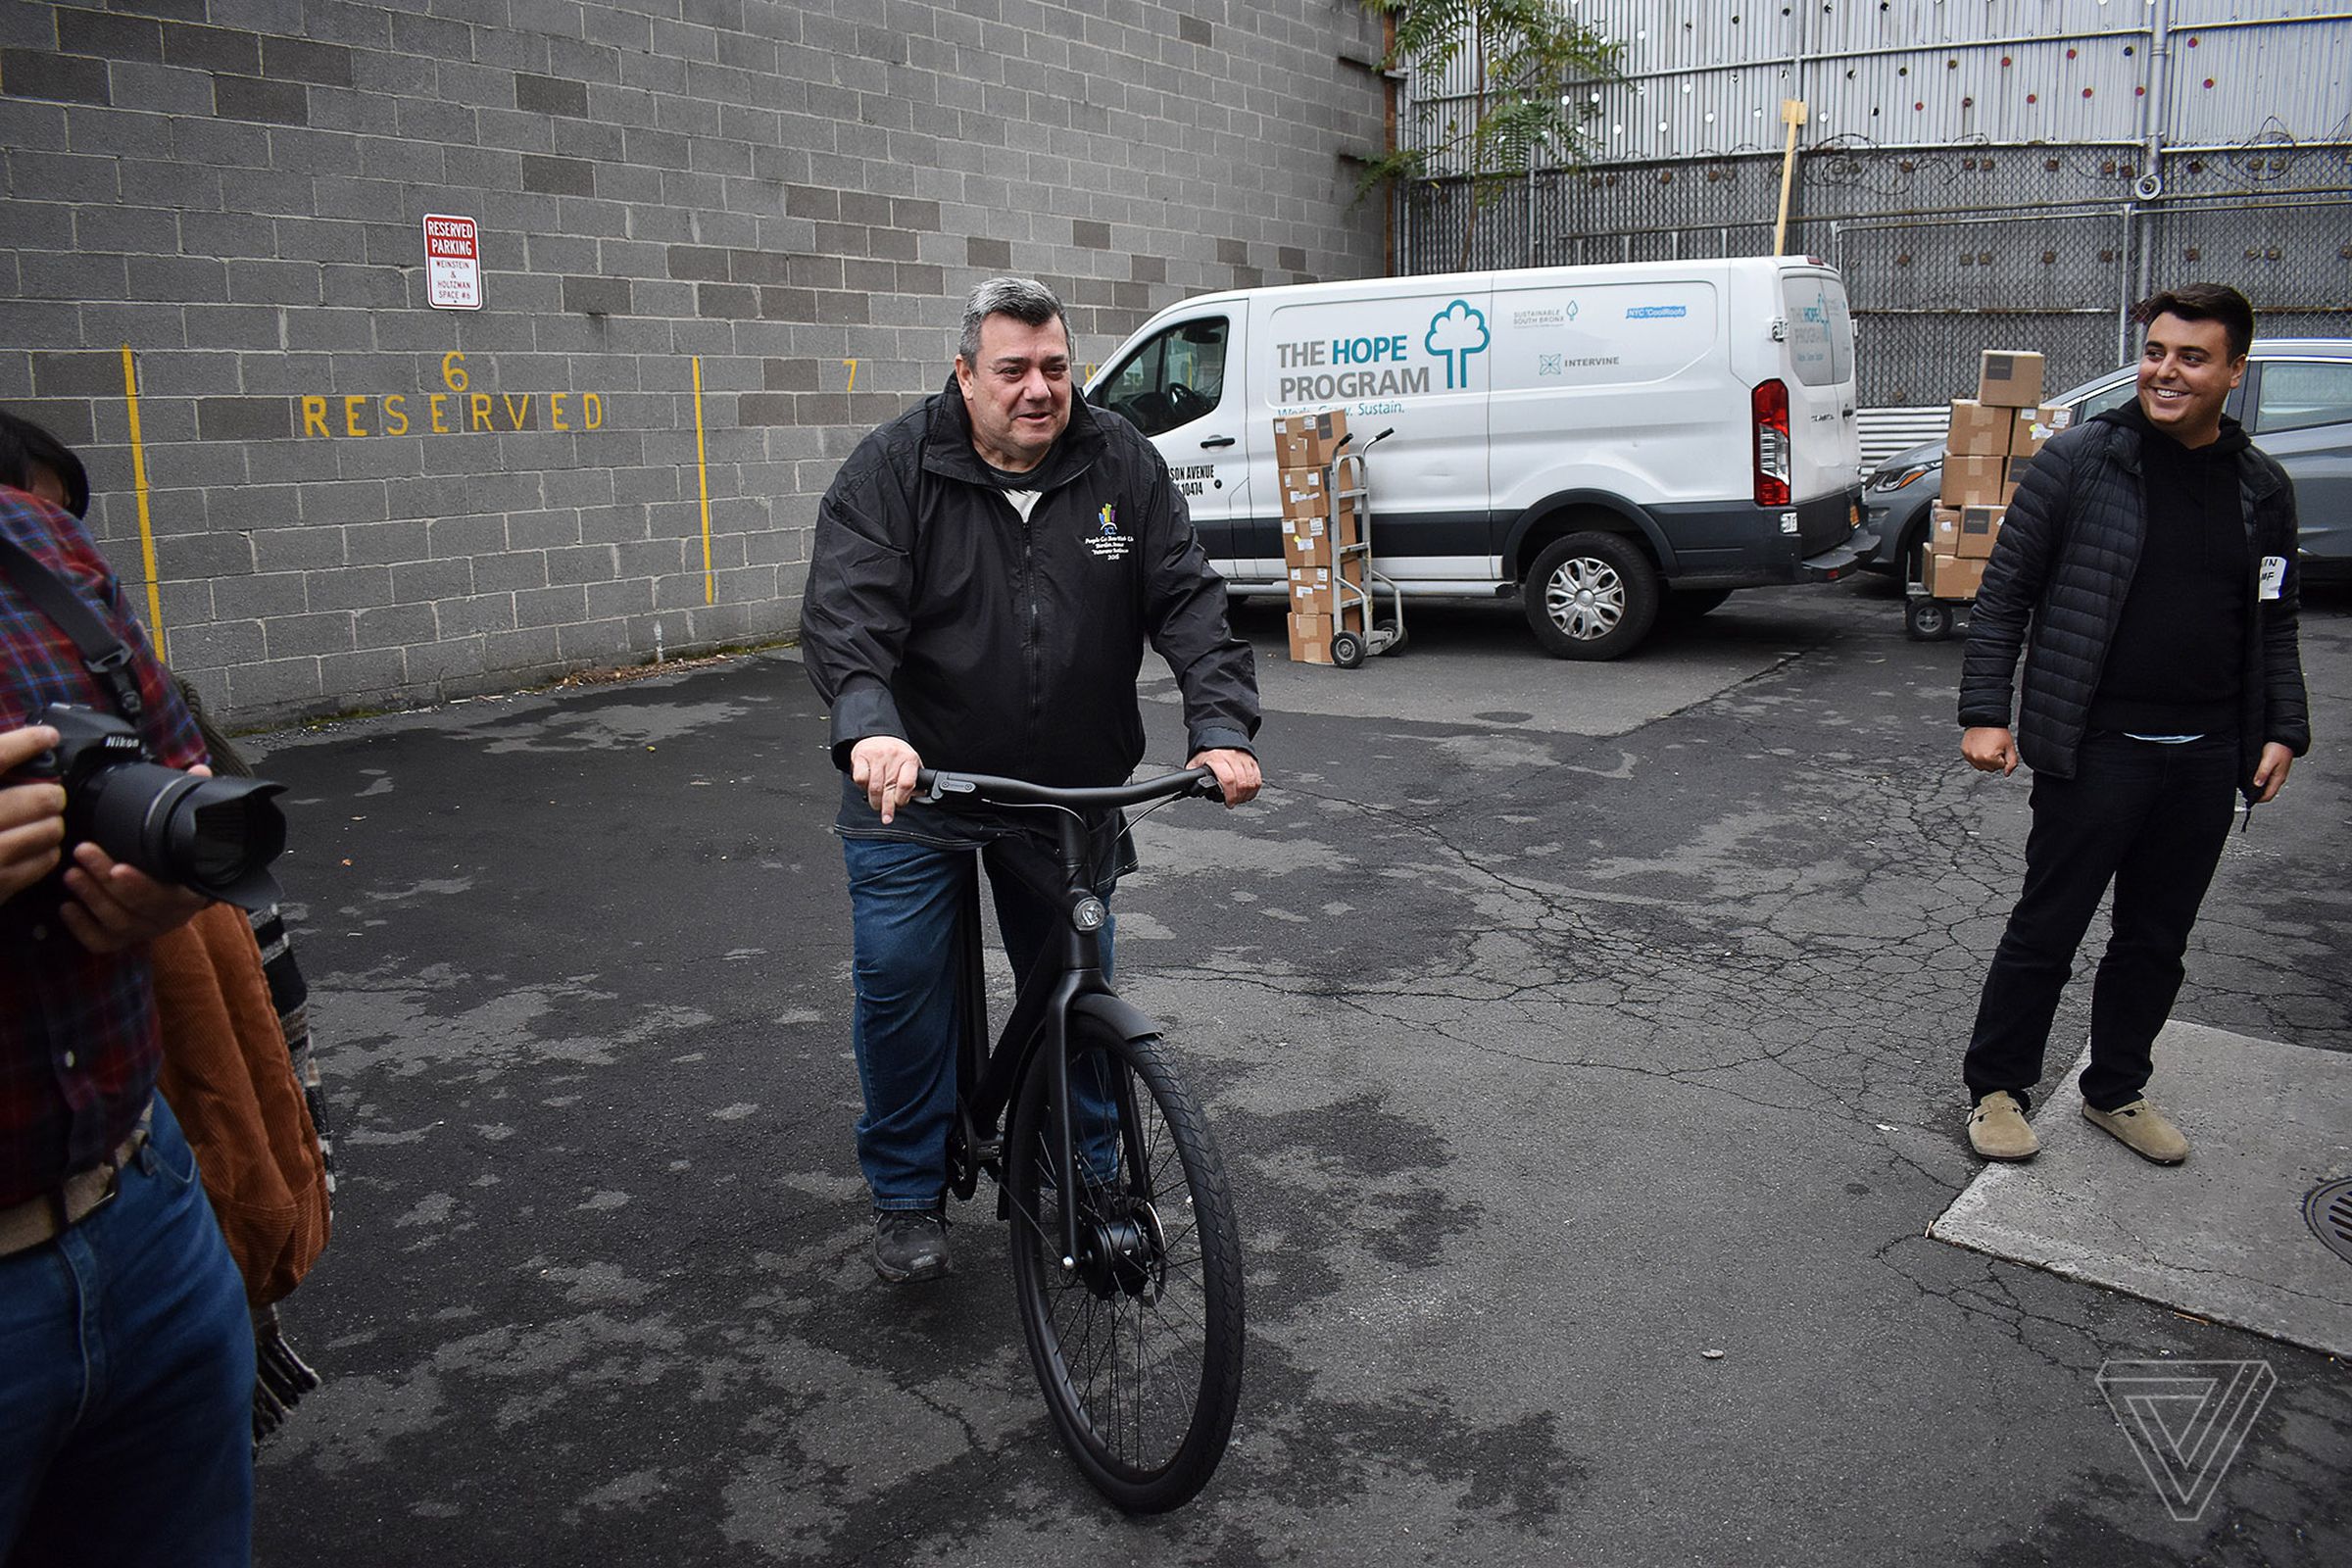 Michael Scanlon, a driver from the Bronx, tries out his new VanMoof e-bike.